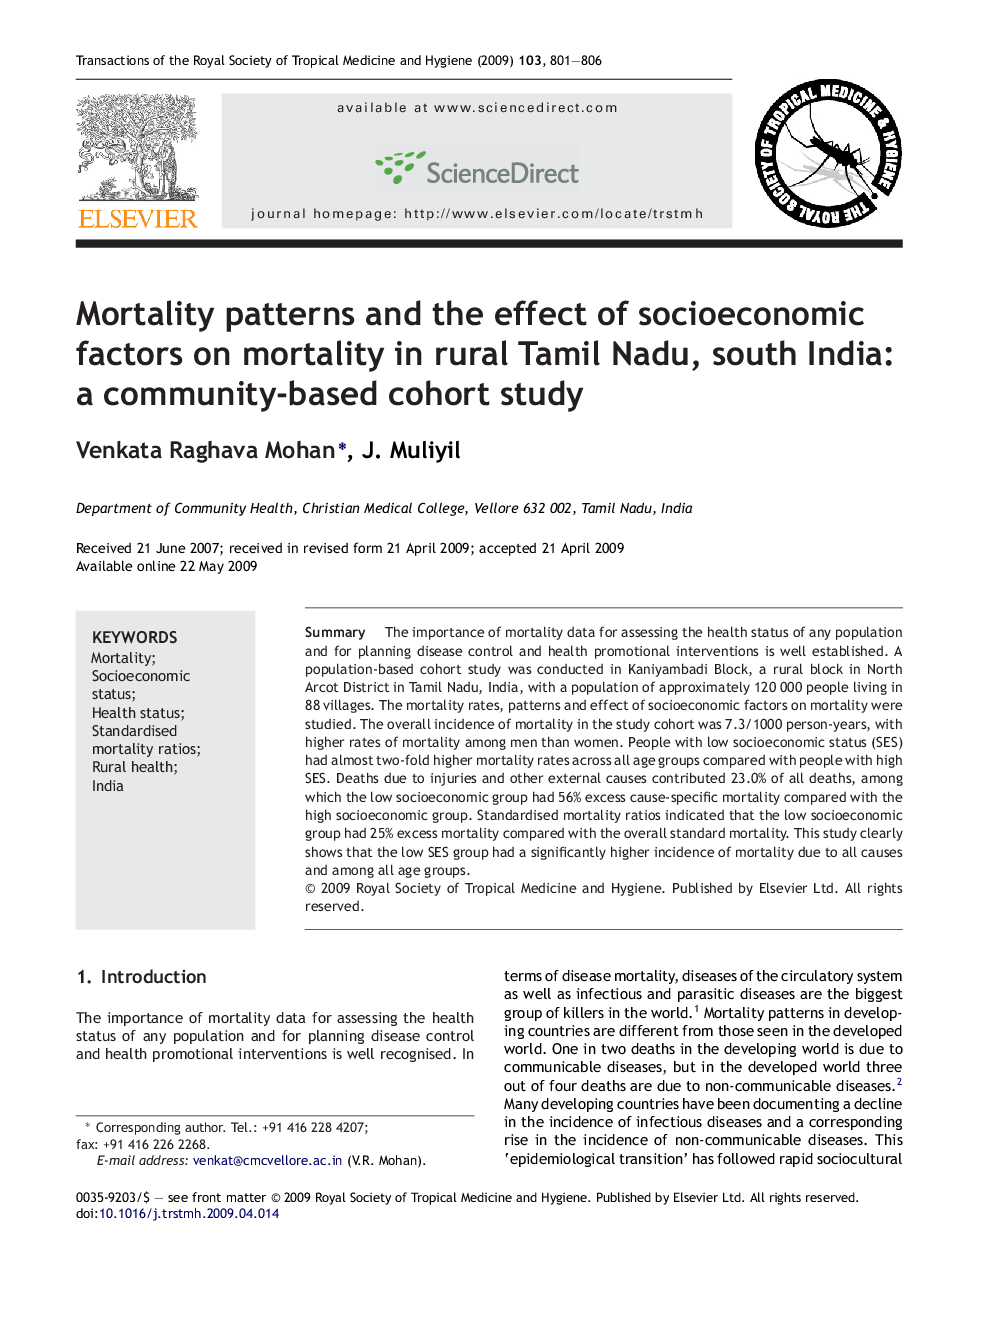 Mortality patterns and the effect of socioeconomic factors on mortality in rural Tamil Nadu, south India: a community-based cohort study